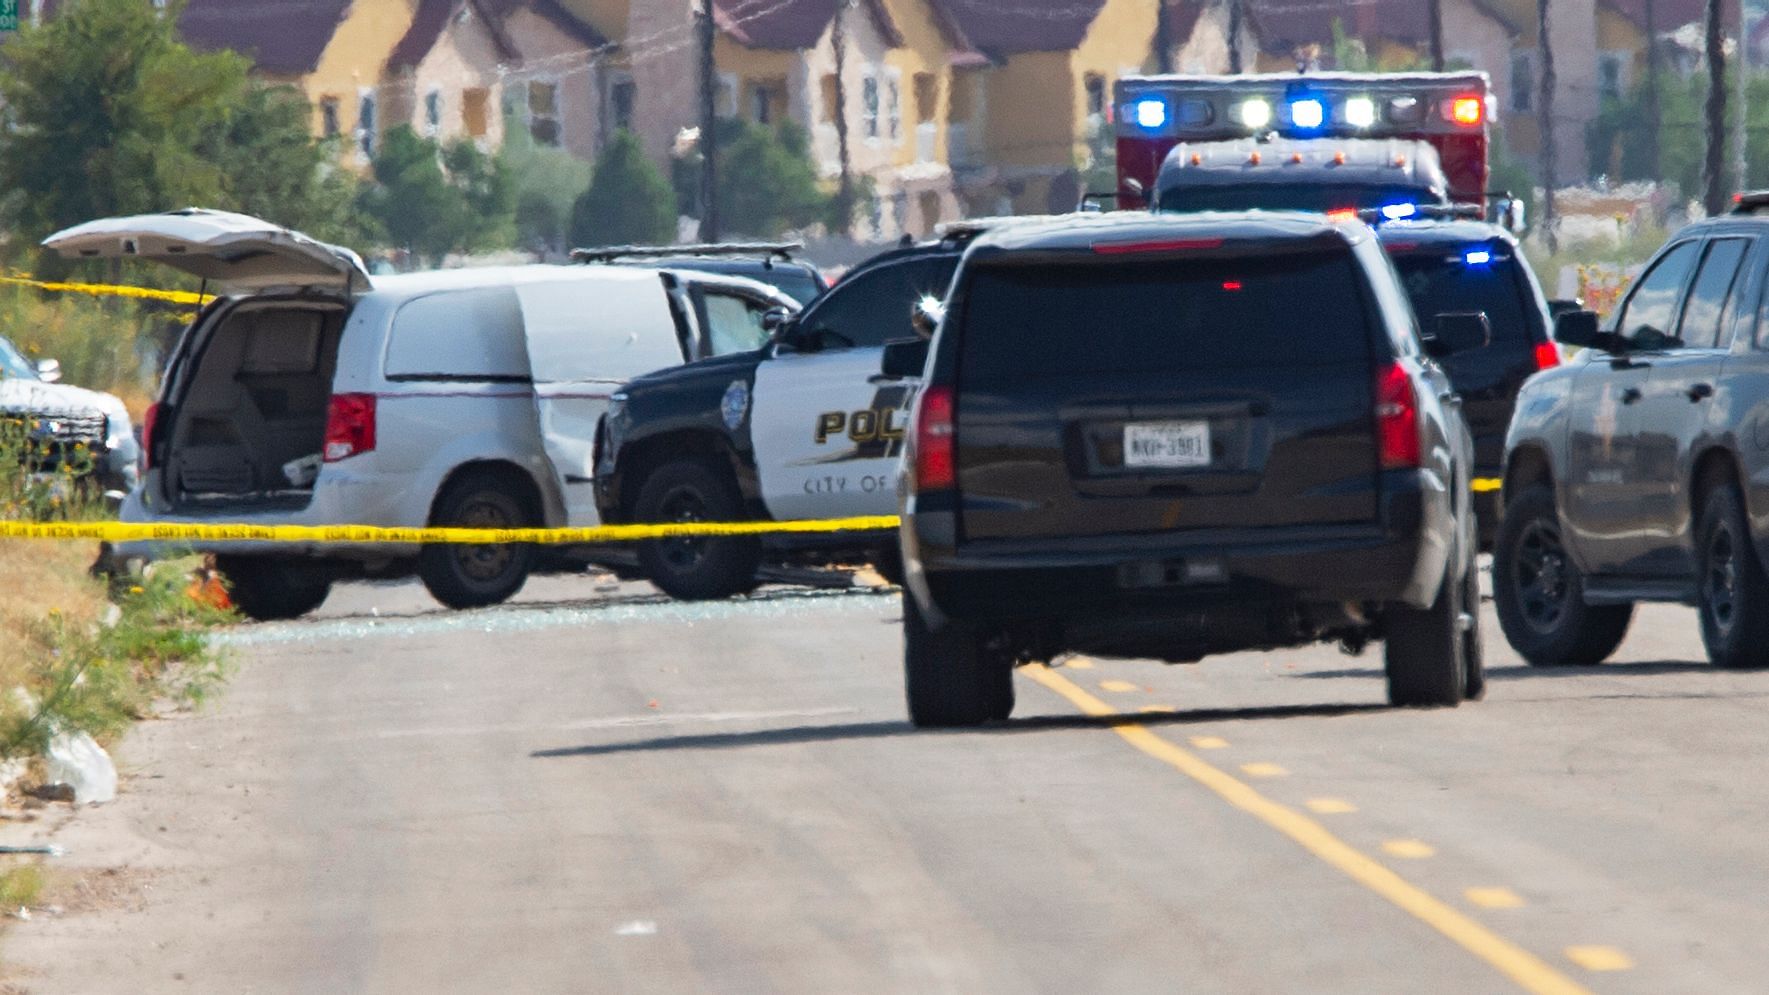 Odessa and Midland police and sheriff’s deputies surround a white van in Odessa, Texas, Saturday, 31 August after reports of gunfire.